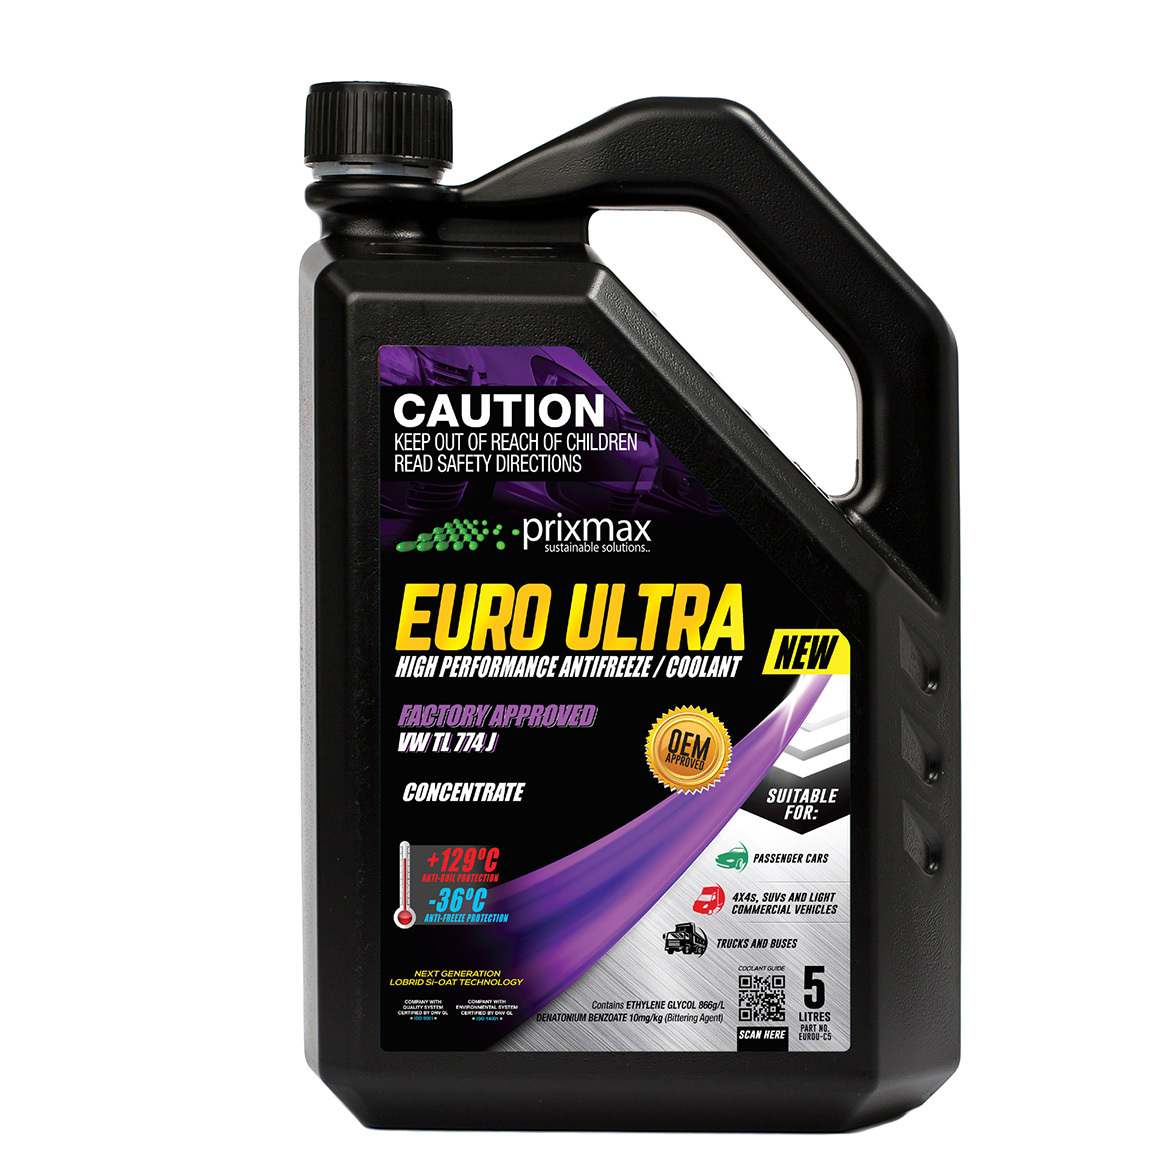 PrixMax Euro Ultra Extended Life Antifreeze Antiboil Concentrate For VW & Others 5L